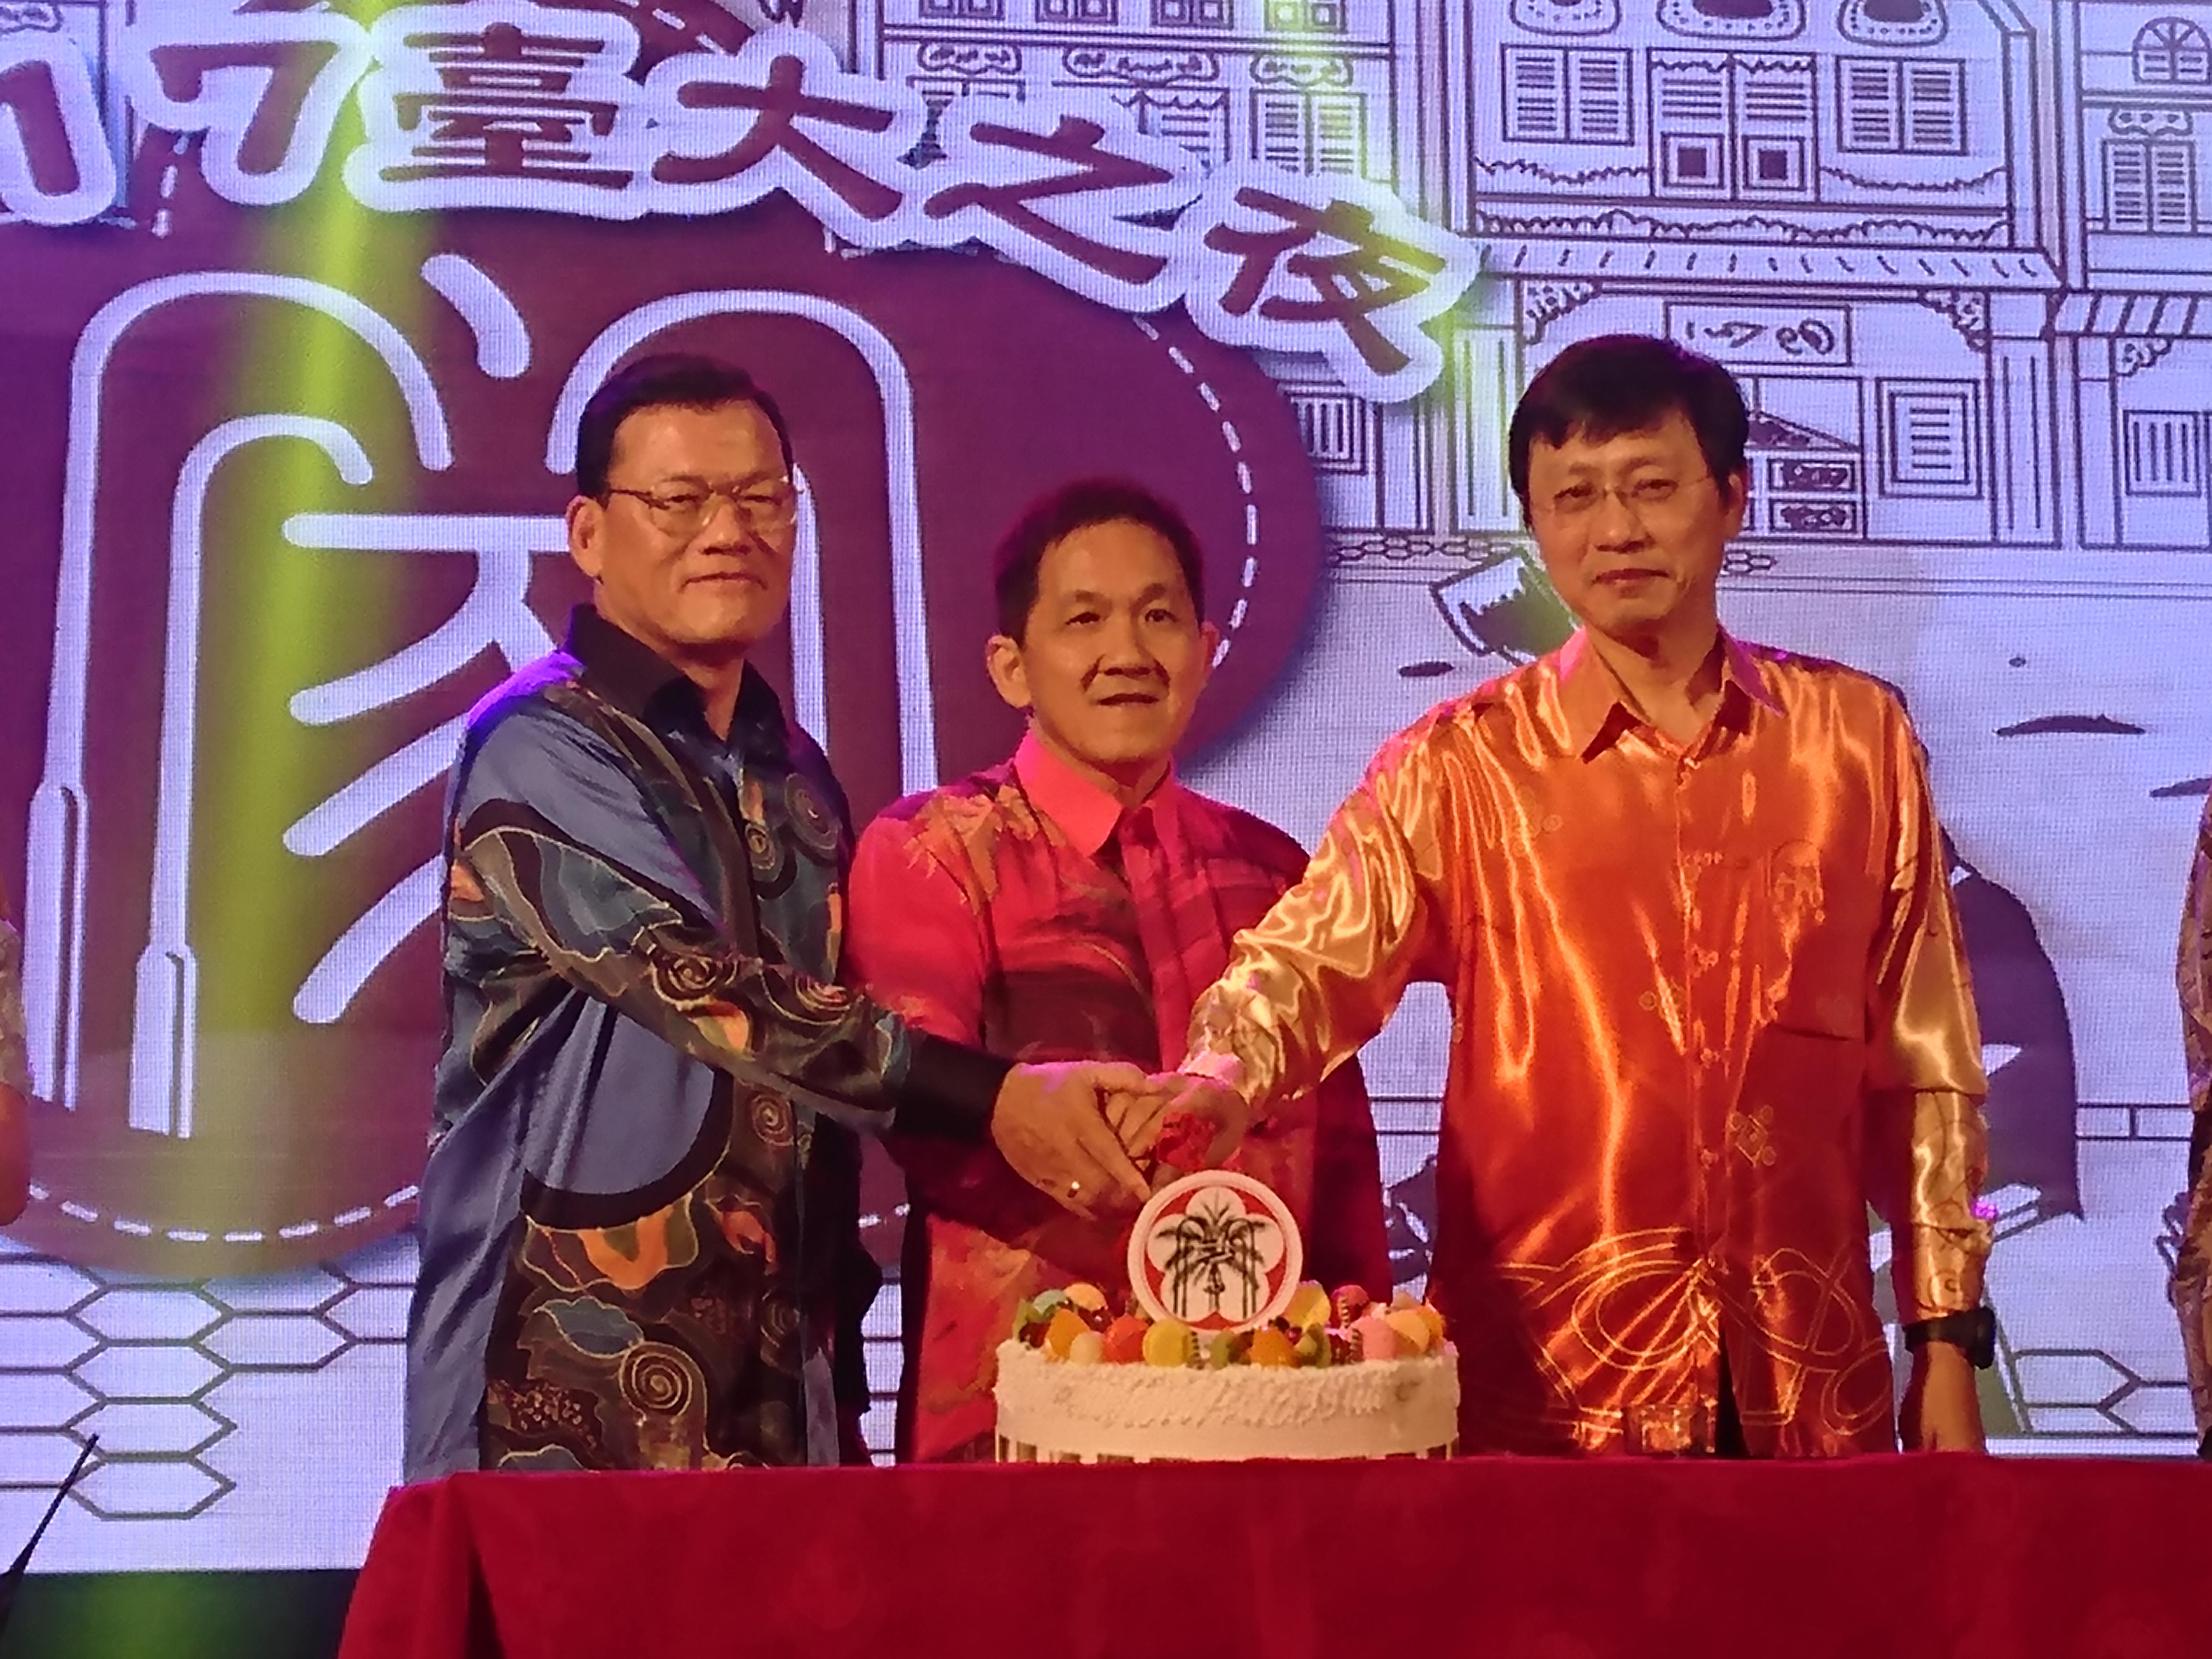 Representative Chang,  James Chi- ping (left) and President How Kang Sing (middle), Interim President Dr Kuo Tei Wei (right) cake cutting ceremony of Alumni Association Of National Taiwan University, Malaysia.